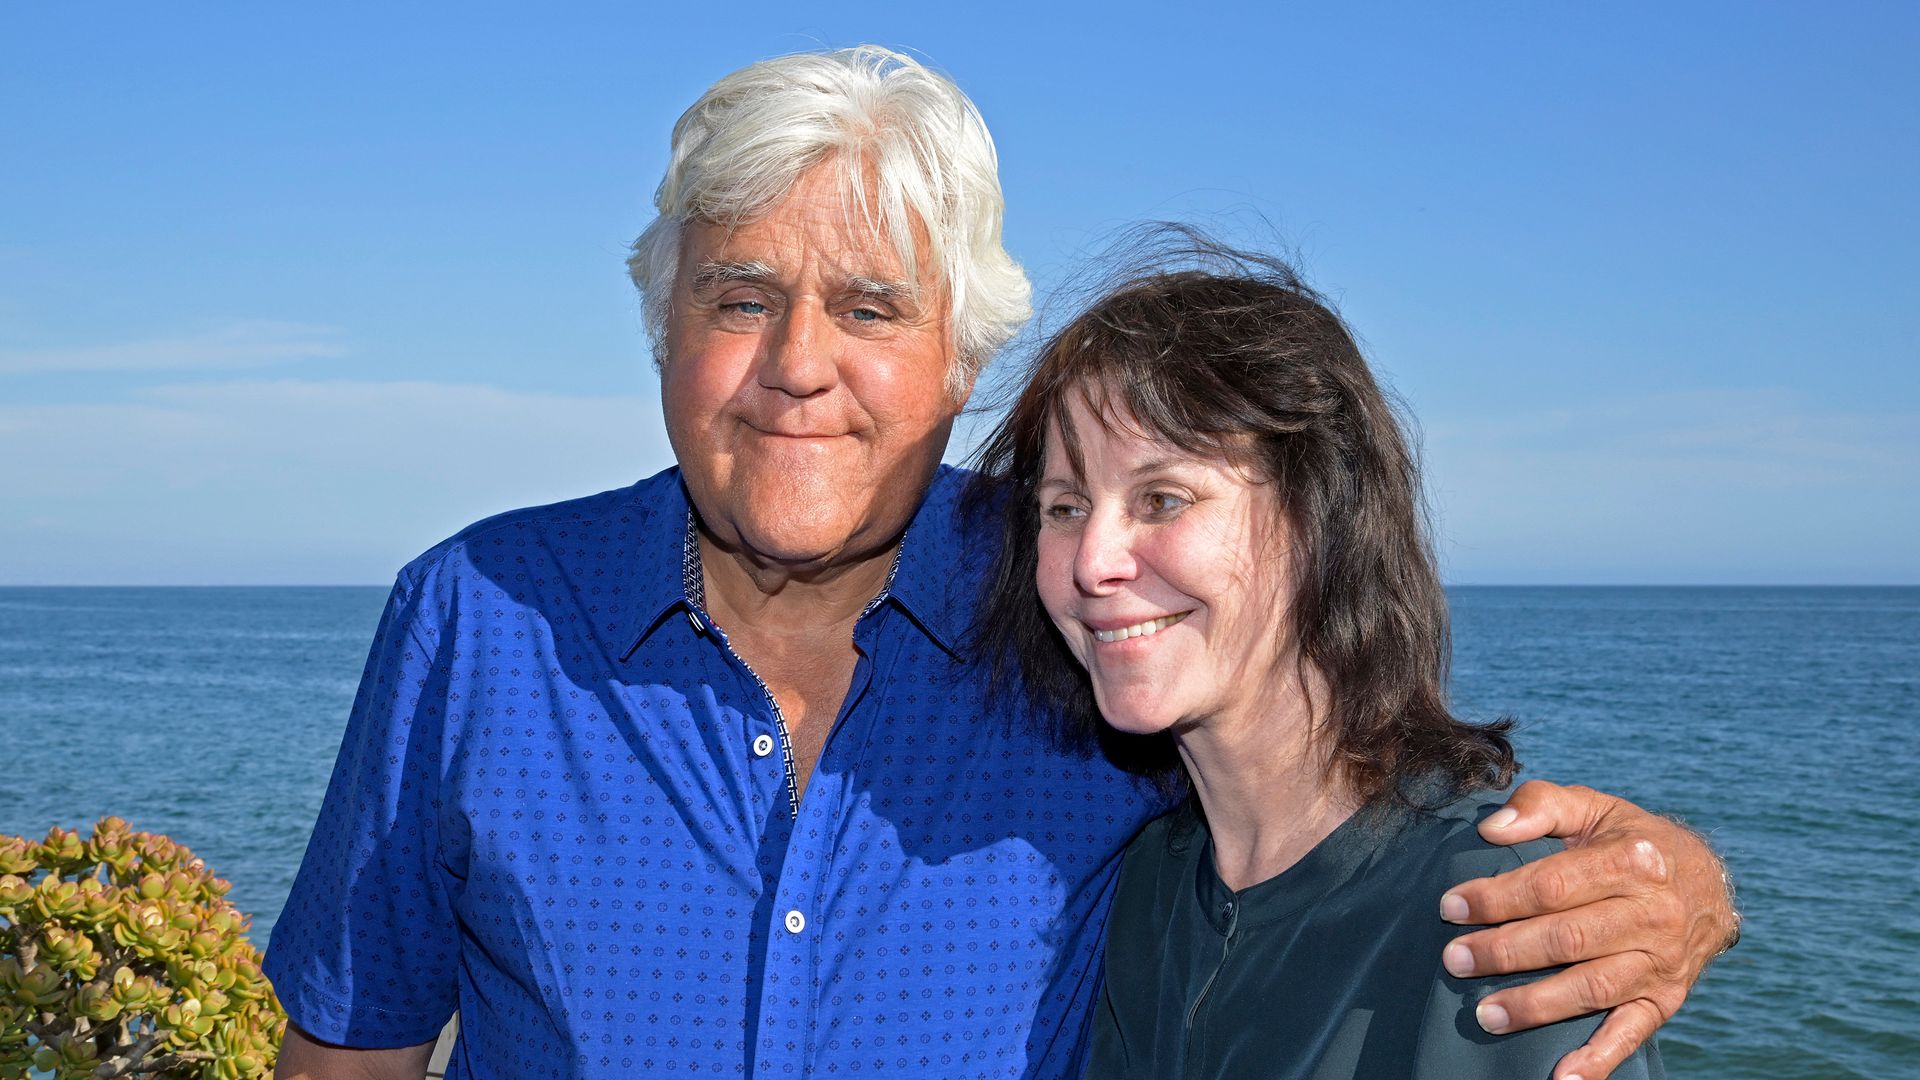 Jay Leno and Mavis Leno attend the private unveiling of the Meyers Manx electric automobile at Little Beach House Malibu on August 08, 2022 in Malibu, California